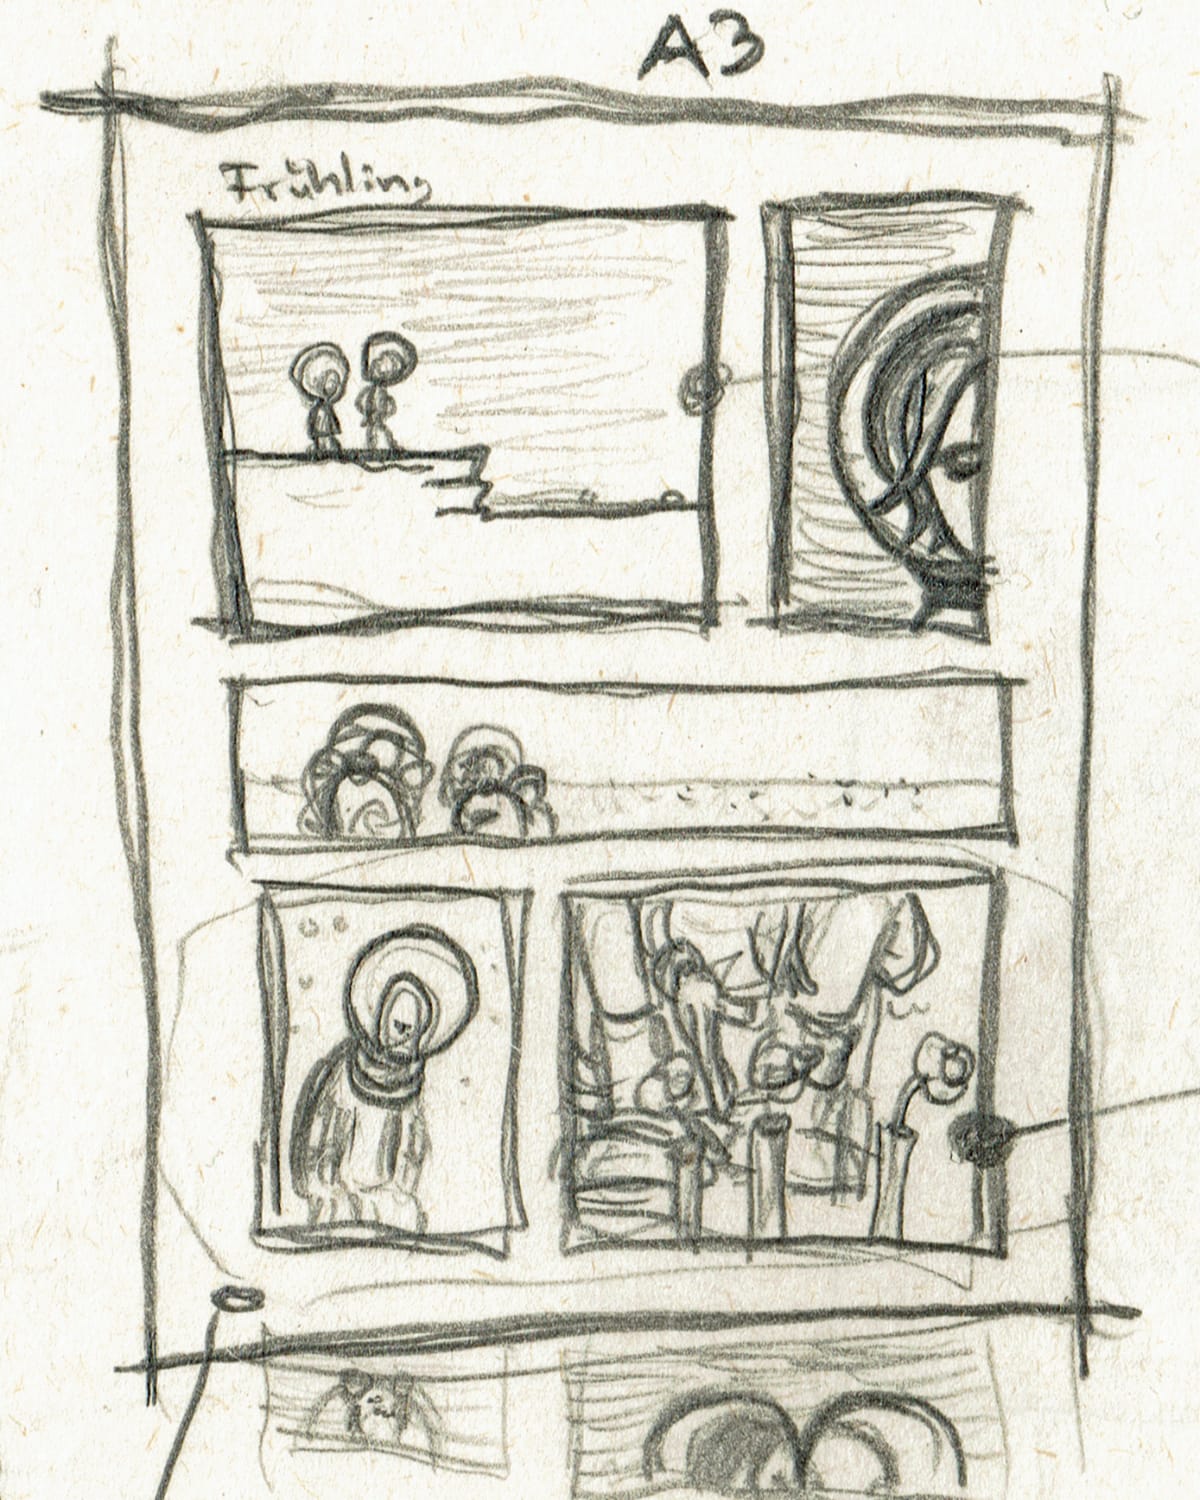 First sketch for my comic strip “Spring”.